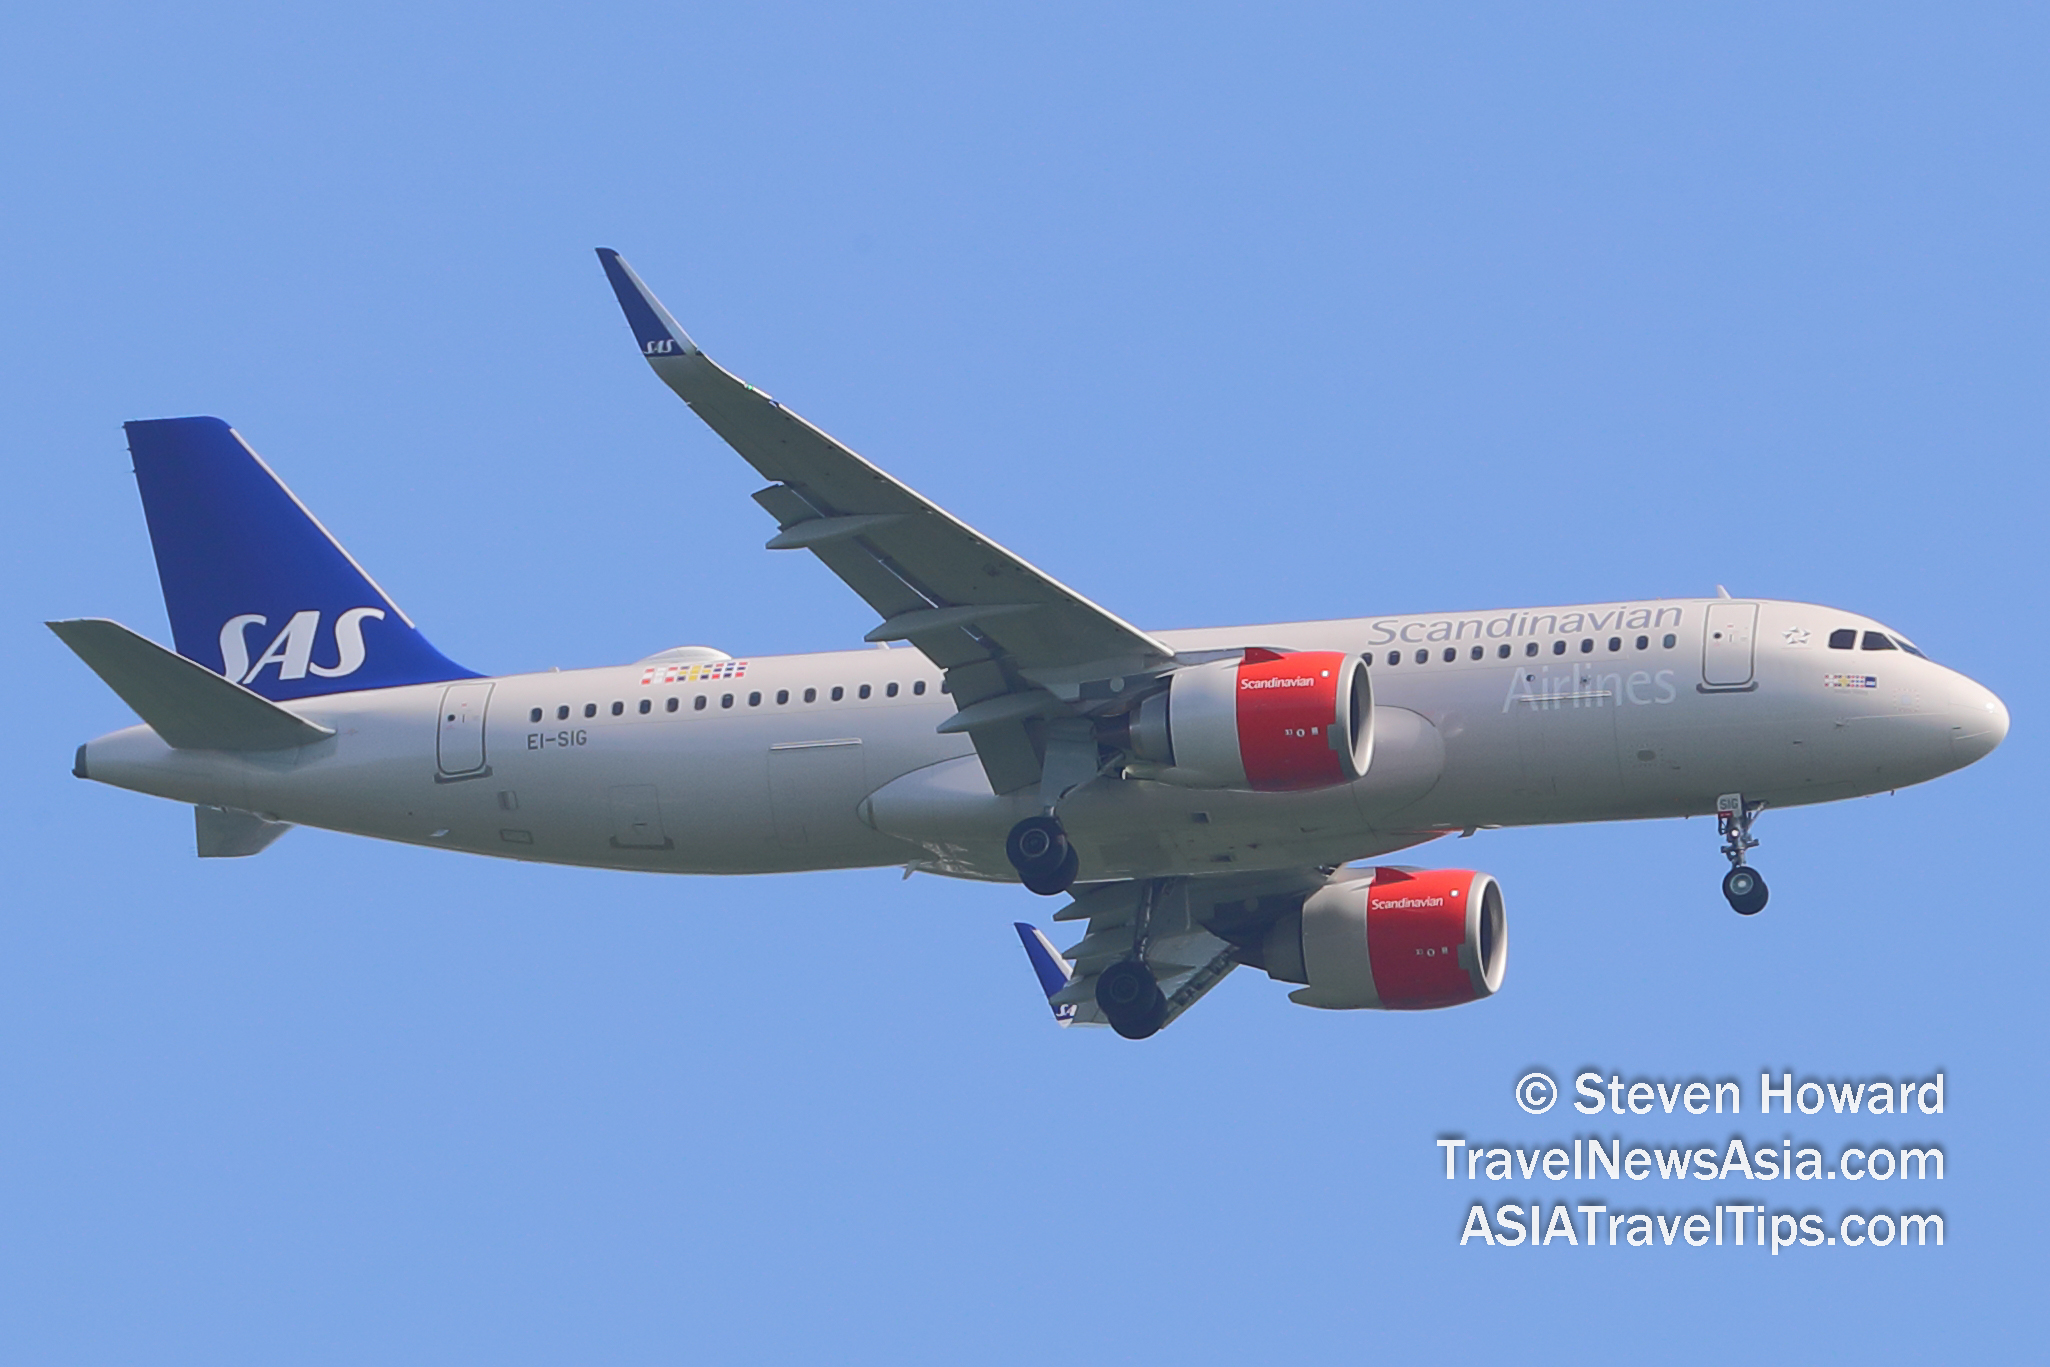 SAS Airbus A320 reg: EI-SIG. Picture by Steven Howard of TravelNewsAsia.com Click to enlarge.